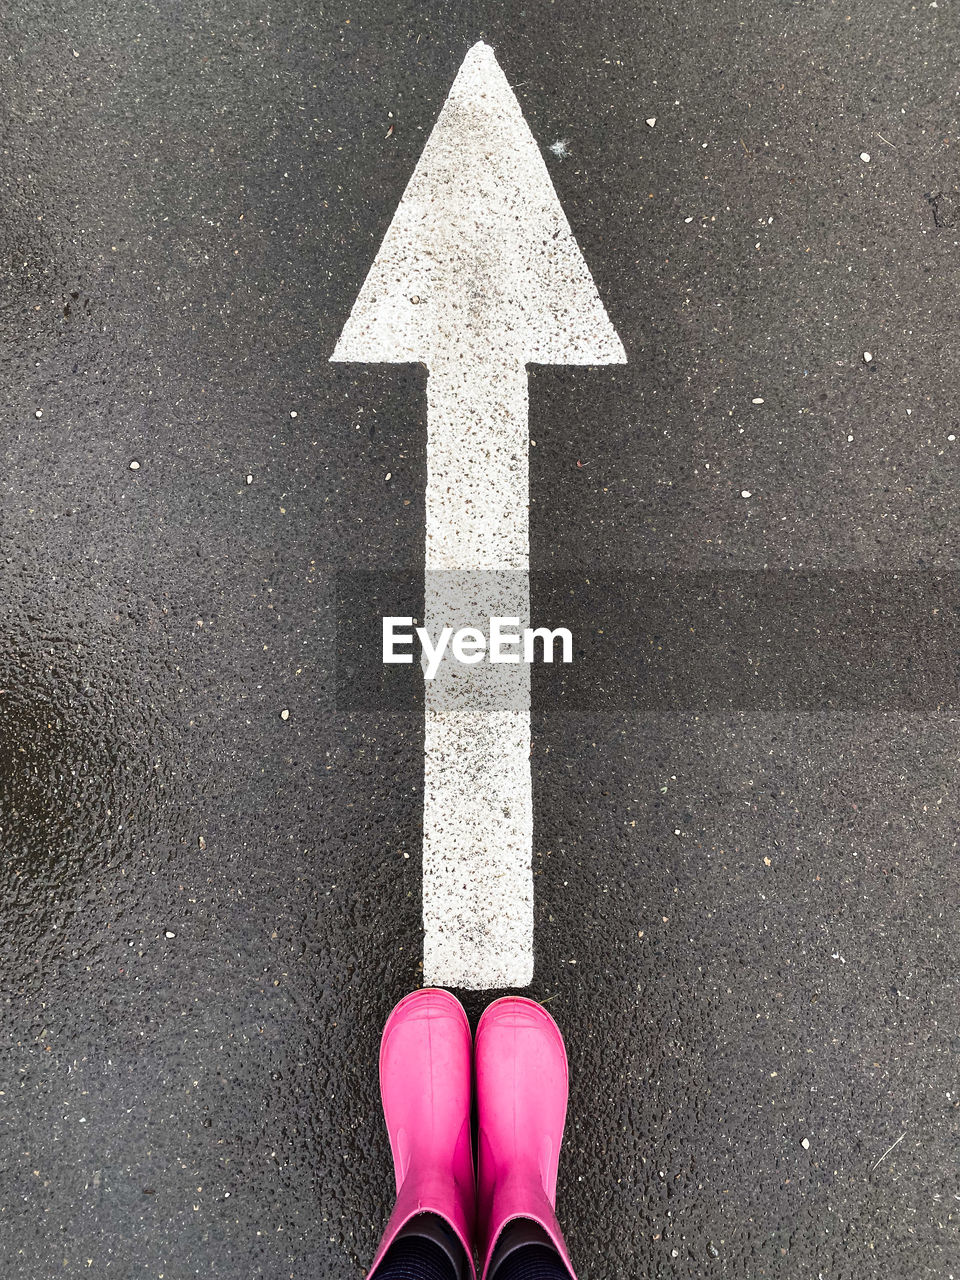 road, sign, one person, symbol, low section, arrow symbol, human leg, shoe, city, street, high angle view, personal perspective, standing, pink, asphalt, marking, red, transportation, day, road marking, guidance, directional sign, communication, white, black, outdoors, limb, human limb, number